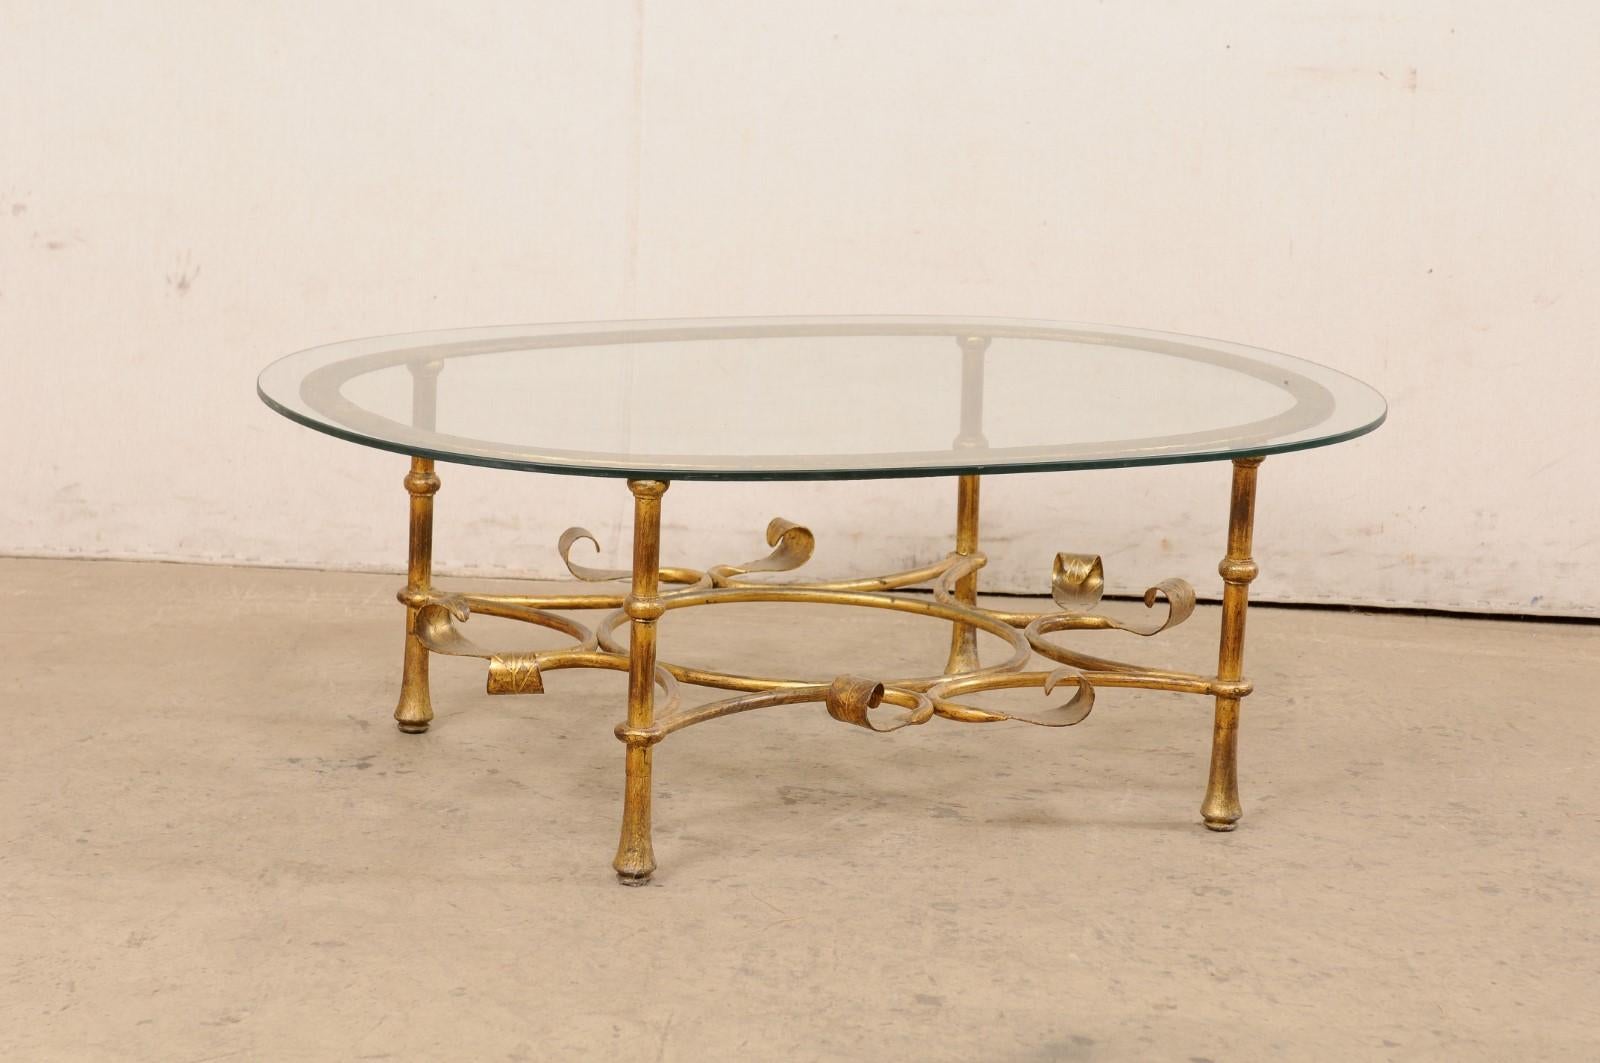 A Spanish iron base coffee table with glass top from the mid 20th century. This vintage table from Spain features an oval-shaped glass top, which is raised upon an iron frame comprised of a oval top raised upon four rounded legs. Each leg is braced